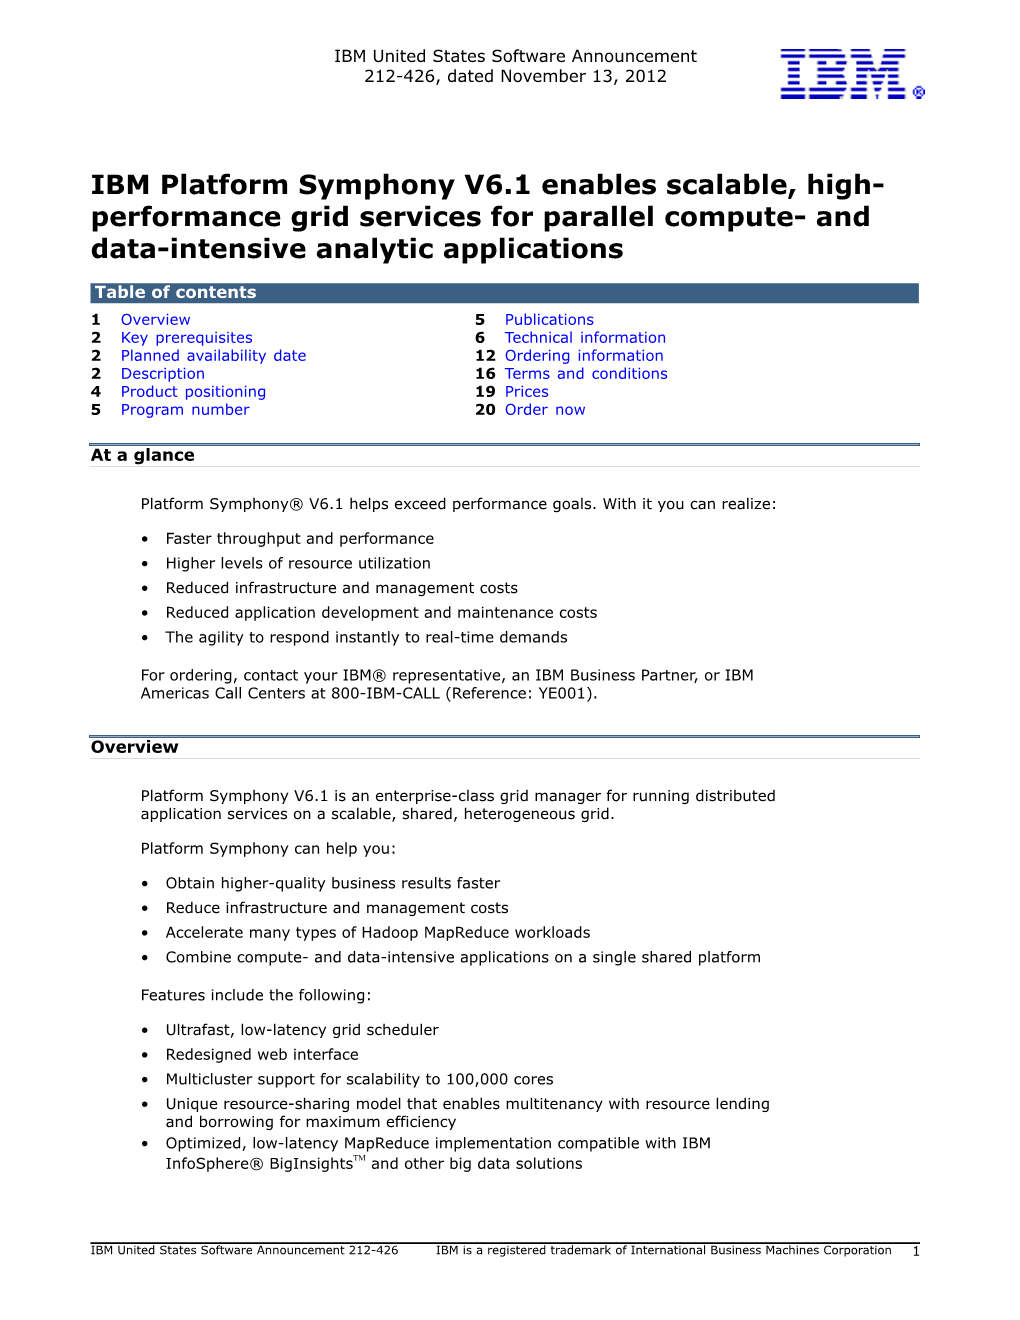 IBM Platform Symphony V6.1 Enables Scalable, High- Performance Grid Services for Parallel Compute- and Data-Intensive Analytic Applications